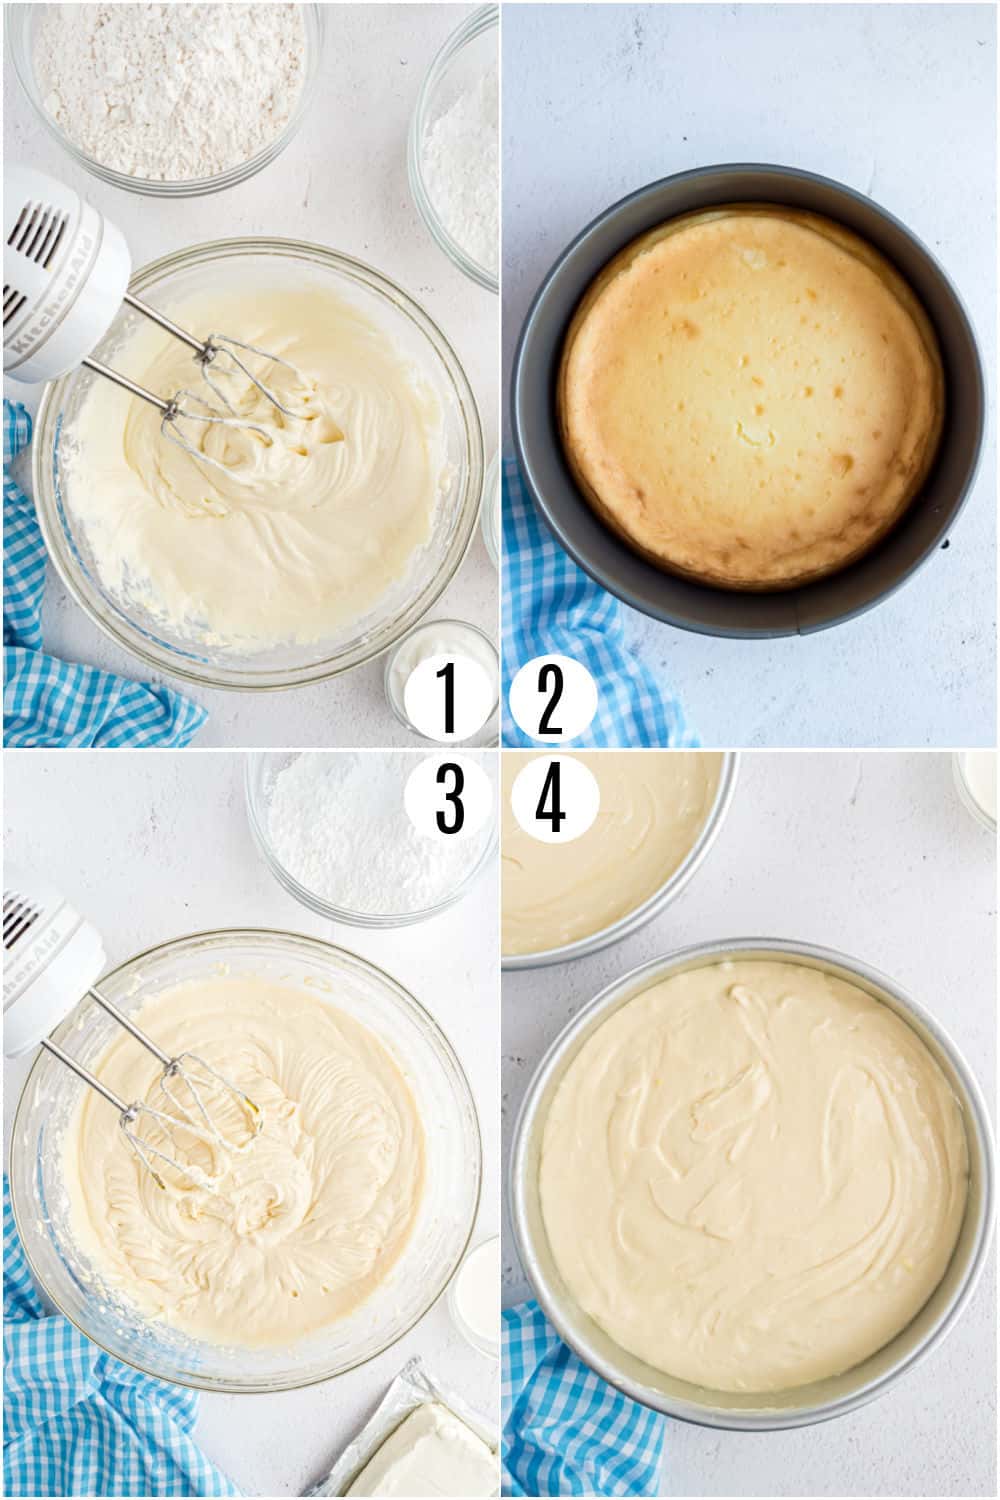 Step by step photos showing how to make lemon cheesecake cake layers.